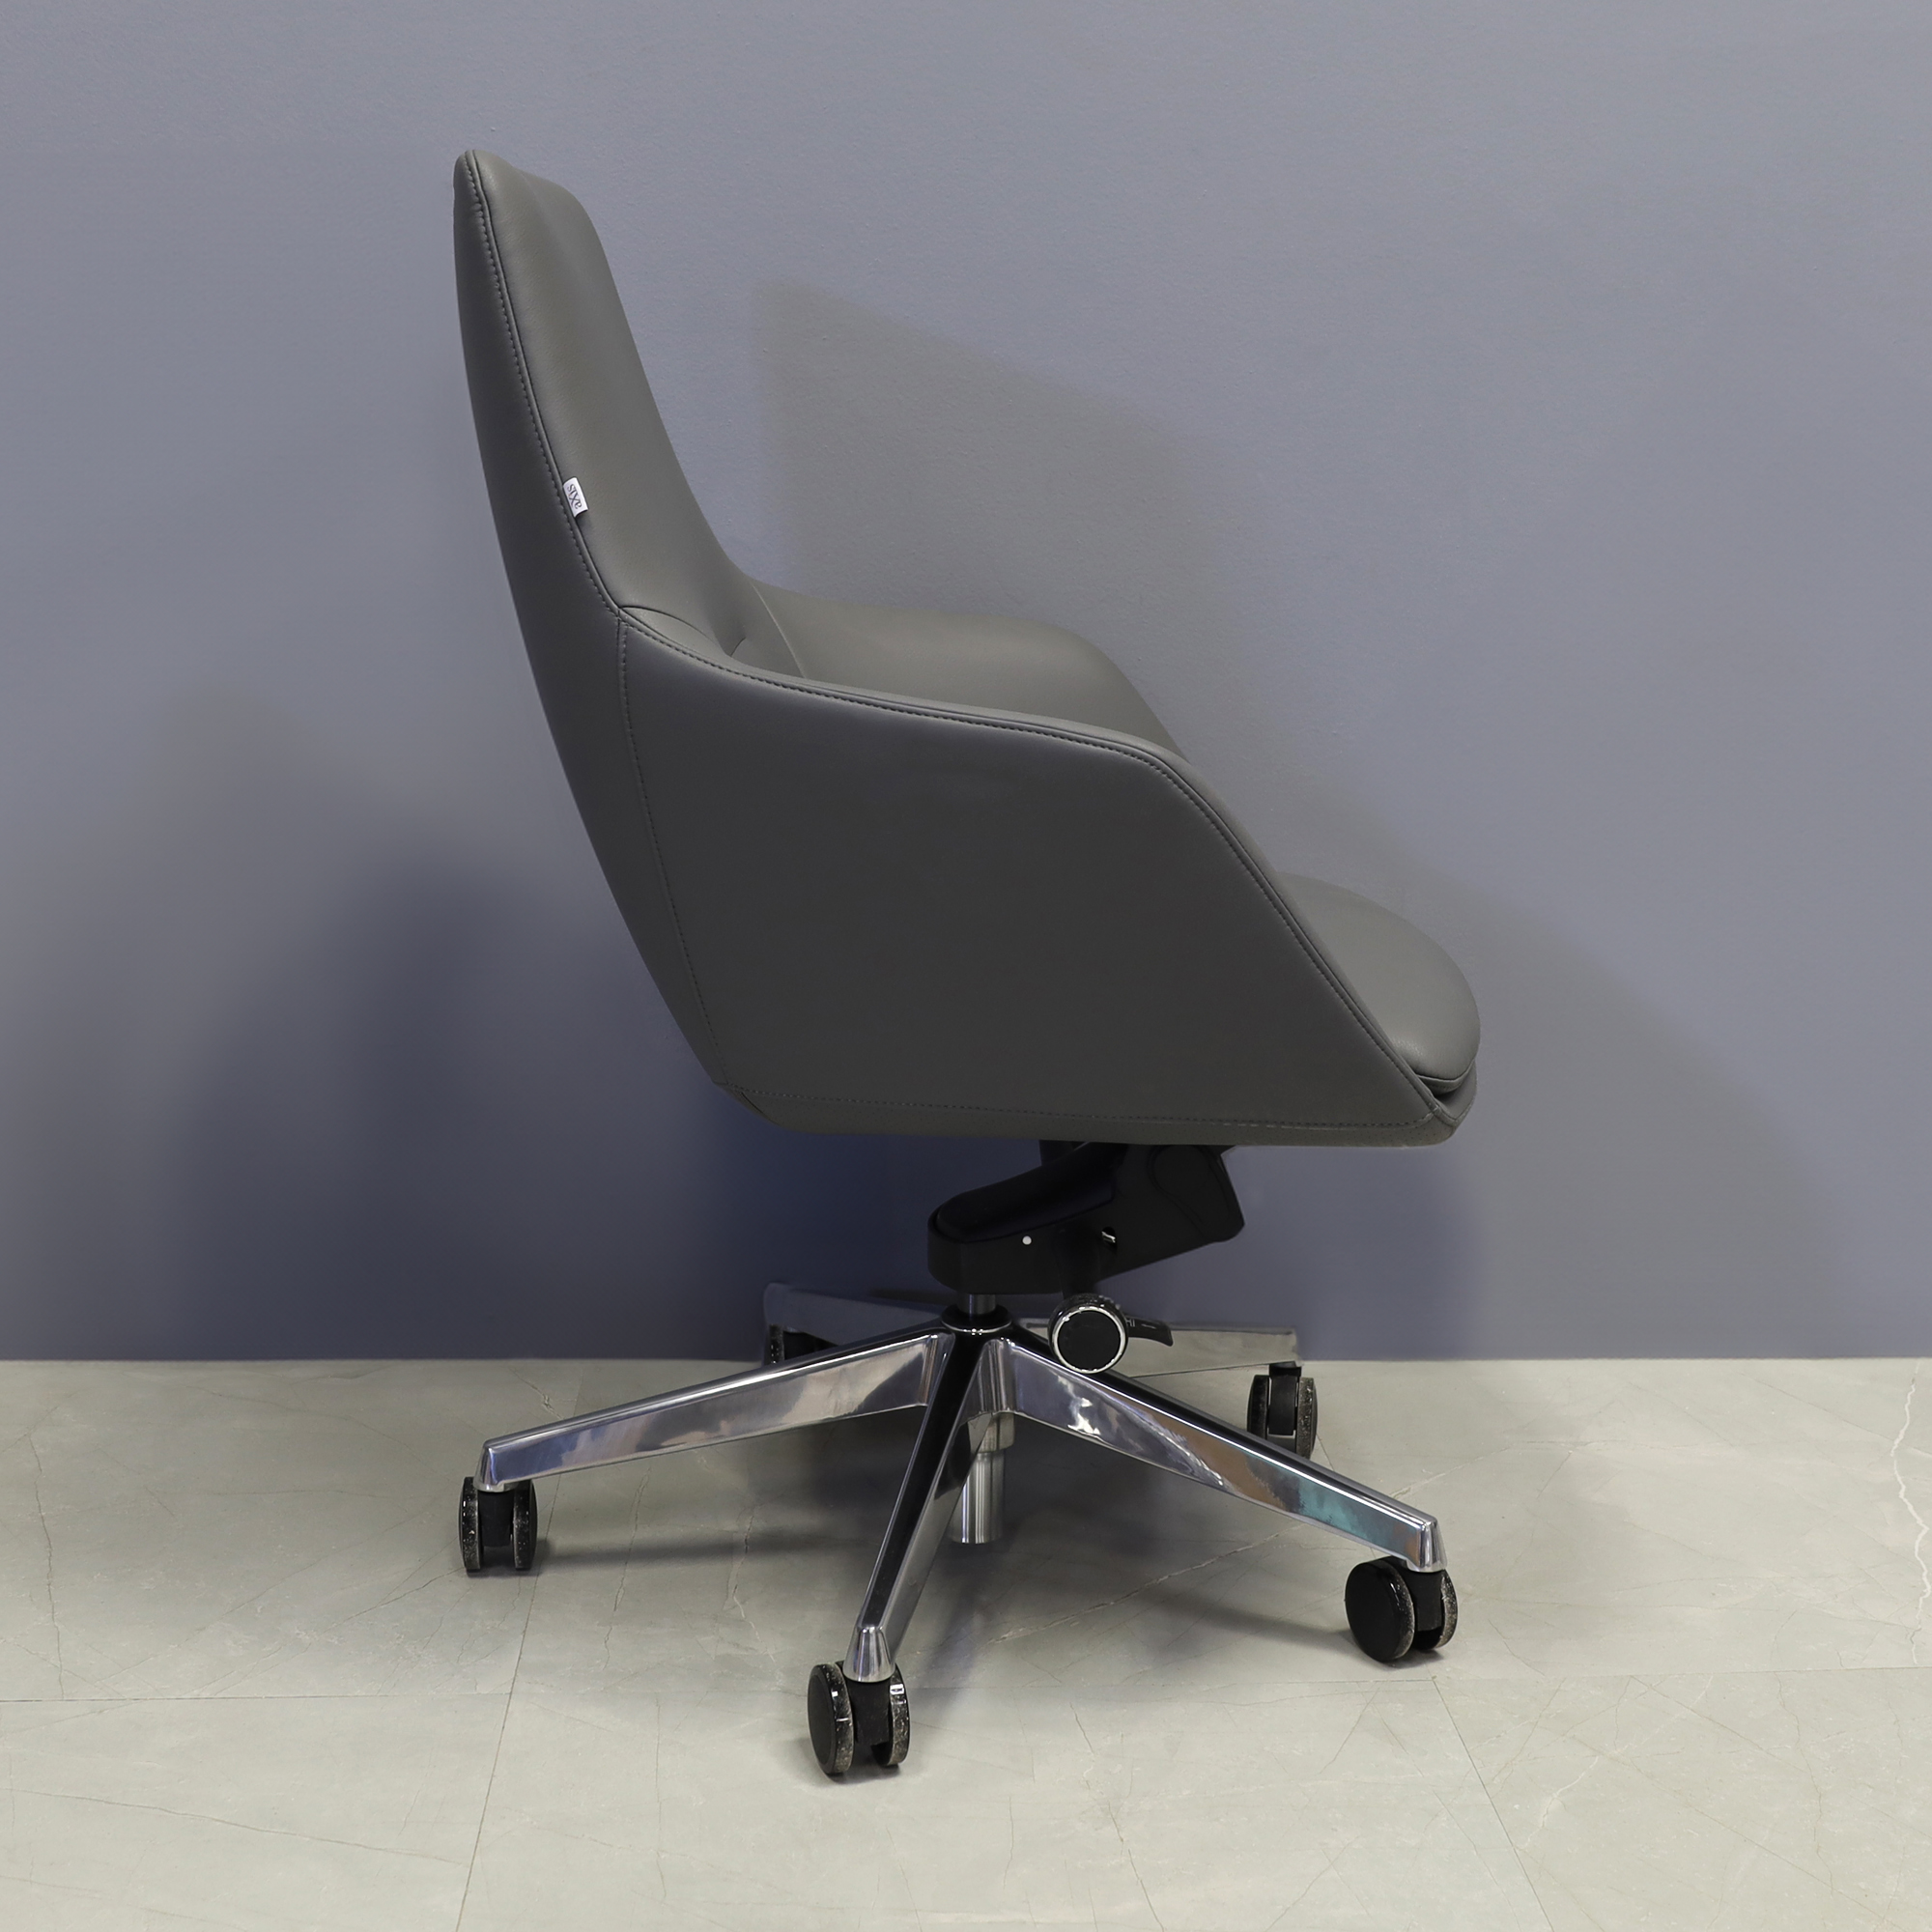 Silla Conference and Boardroom Chair in gray leatherette, shown here.